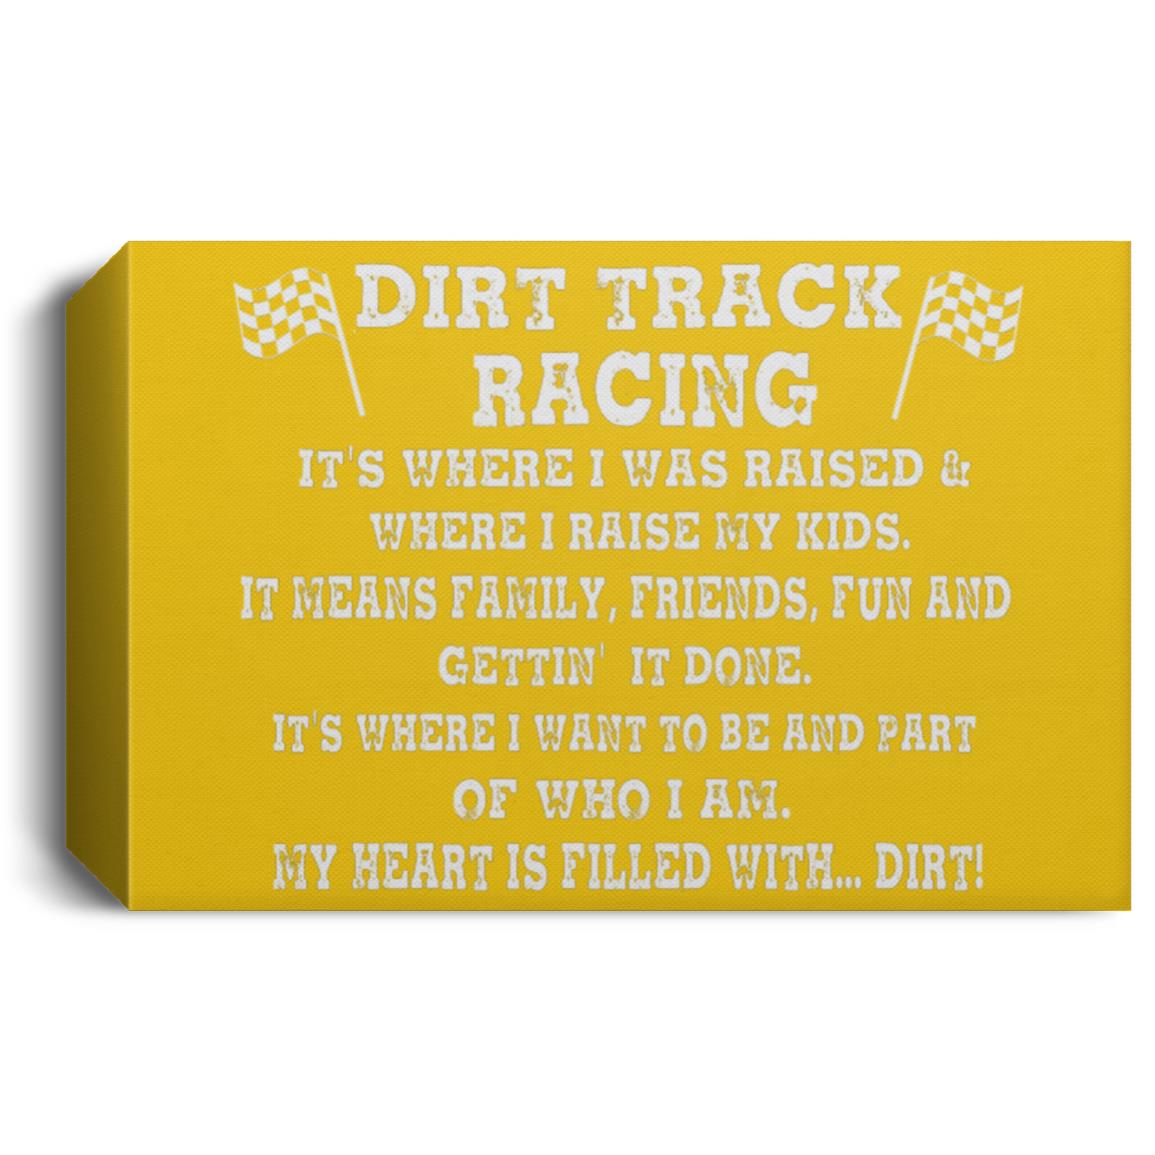 Dirt Track Racing It's Where I Was Raised Deluxe Landscape Canvas 1.5in Frame